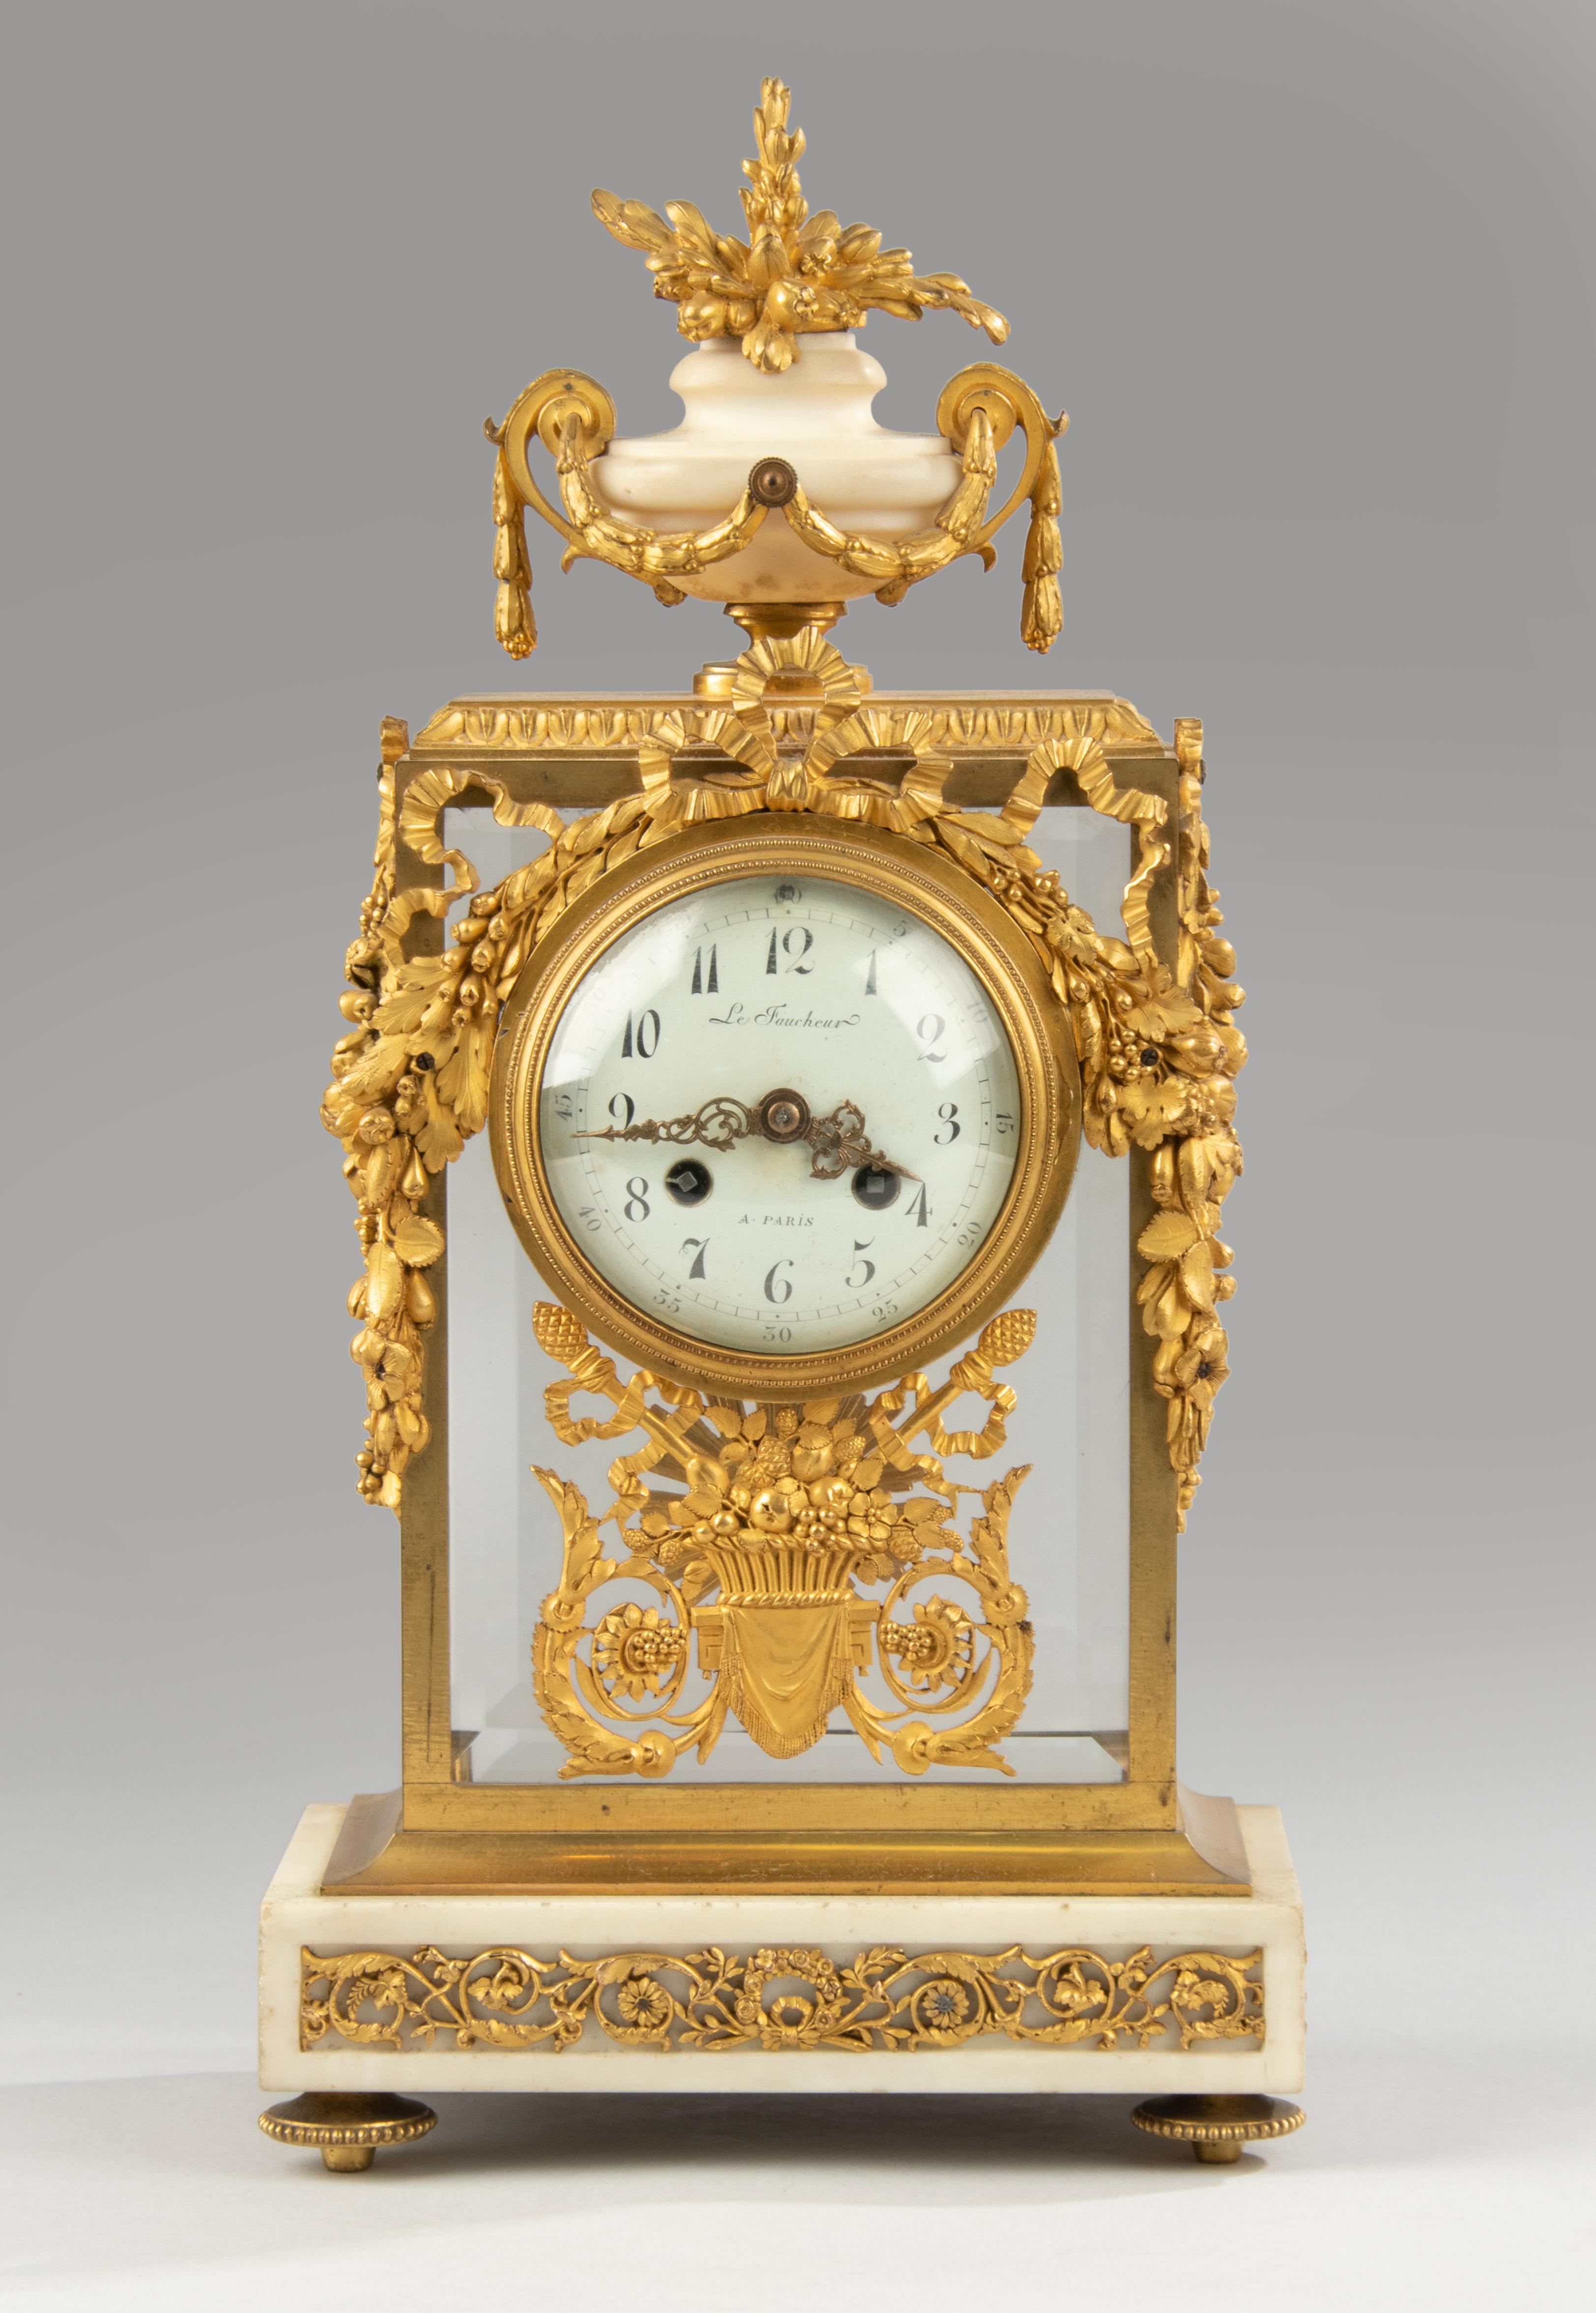 A finely bronze fire-gilded ormolu mantel clock set with matching candelabras. Rich ornate with typical Louis XVI mounts, floral garlands, scrolls, ribbons and bow. The case is made of gilt brass with beveled glass all around, on white marble base.